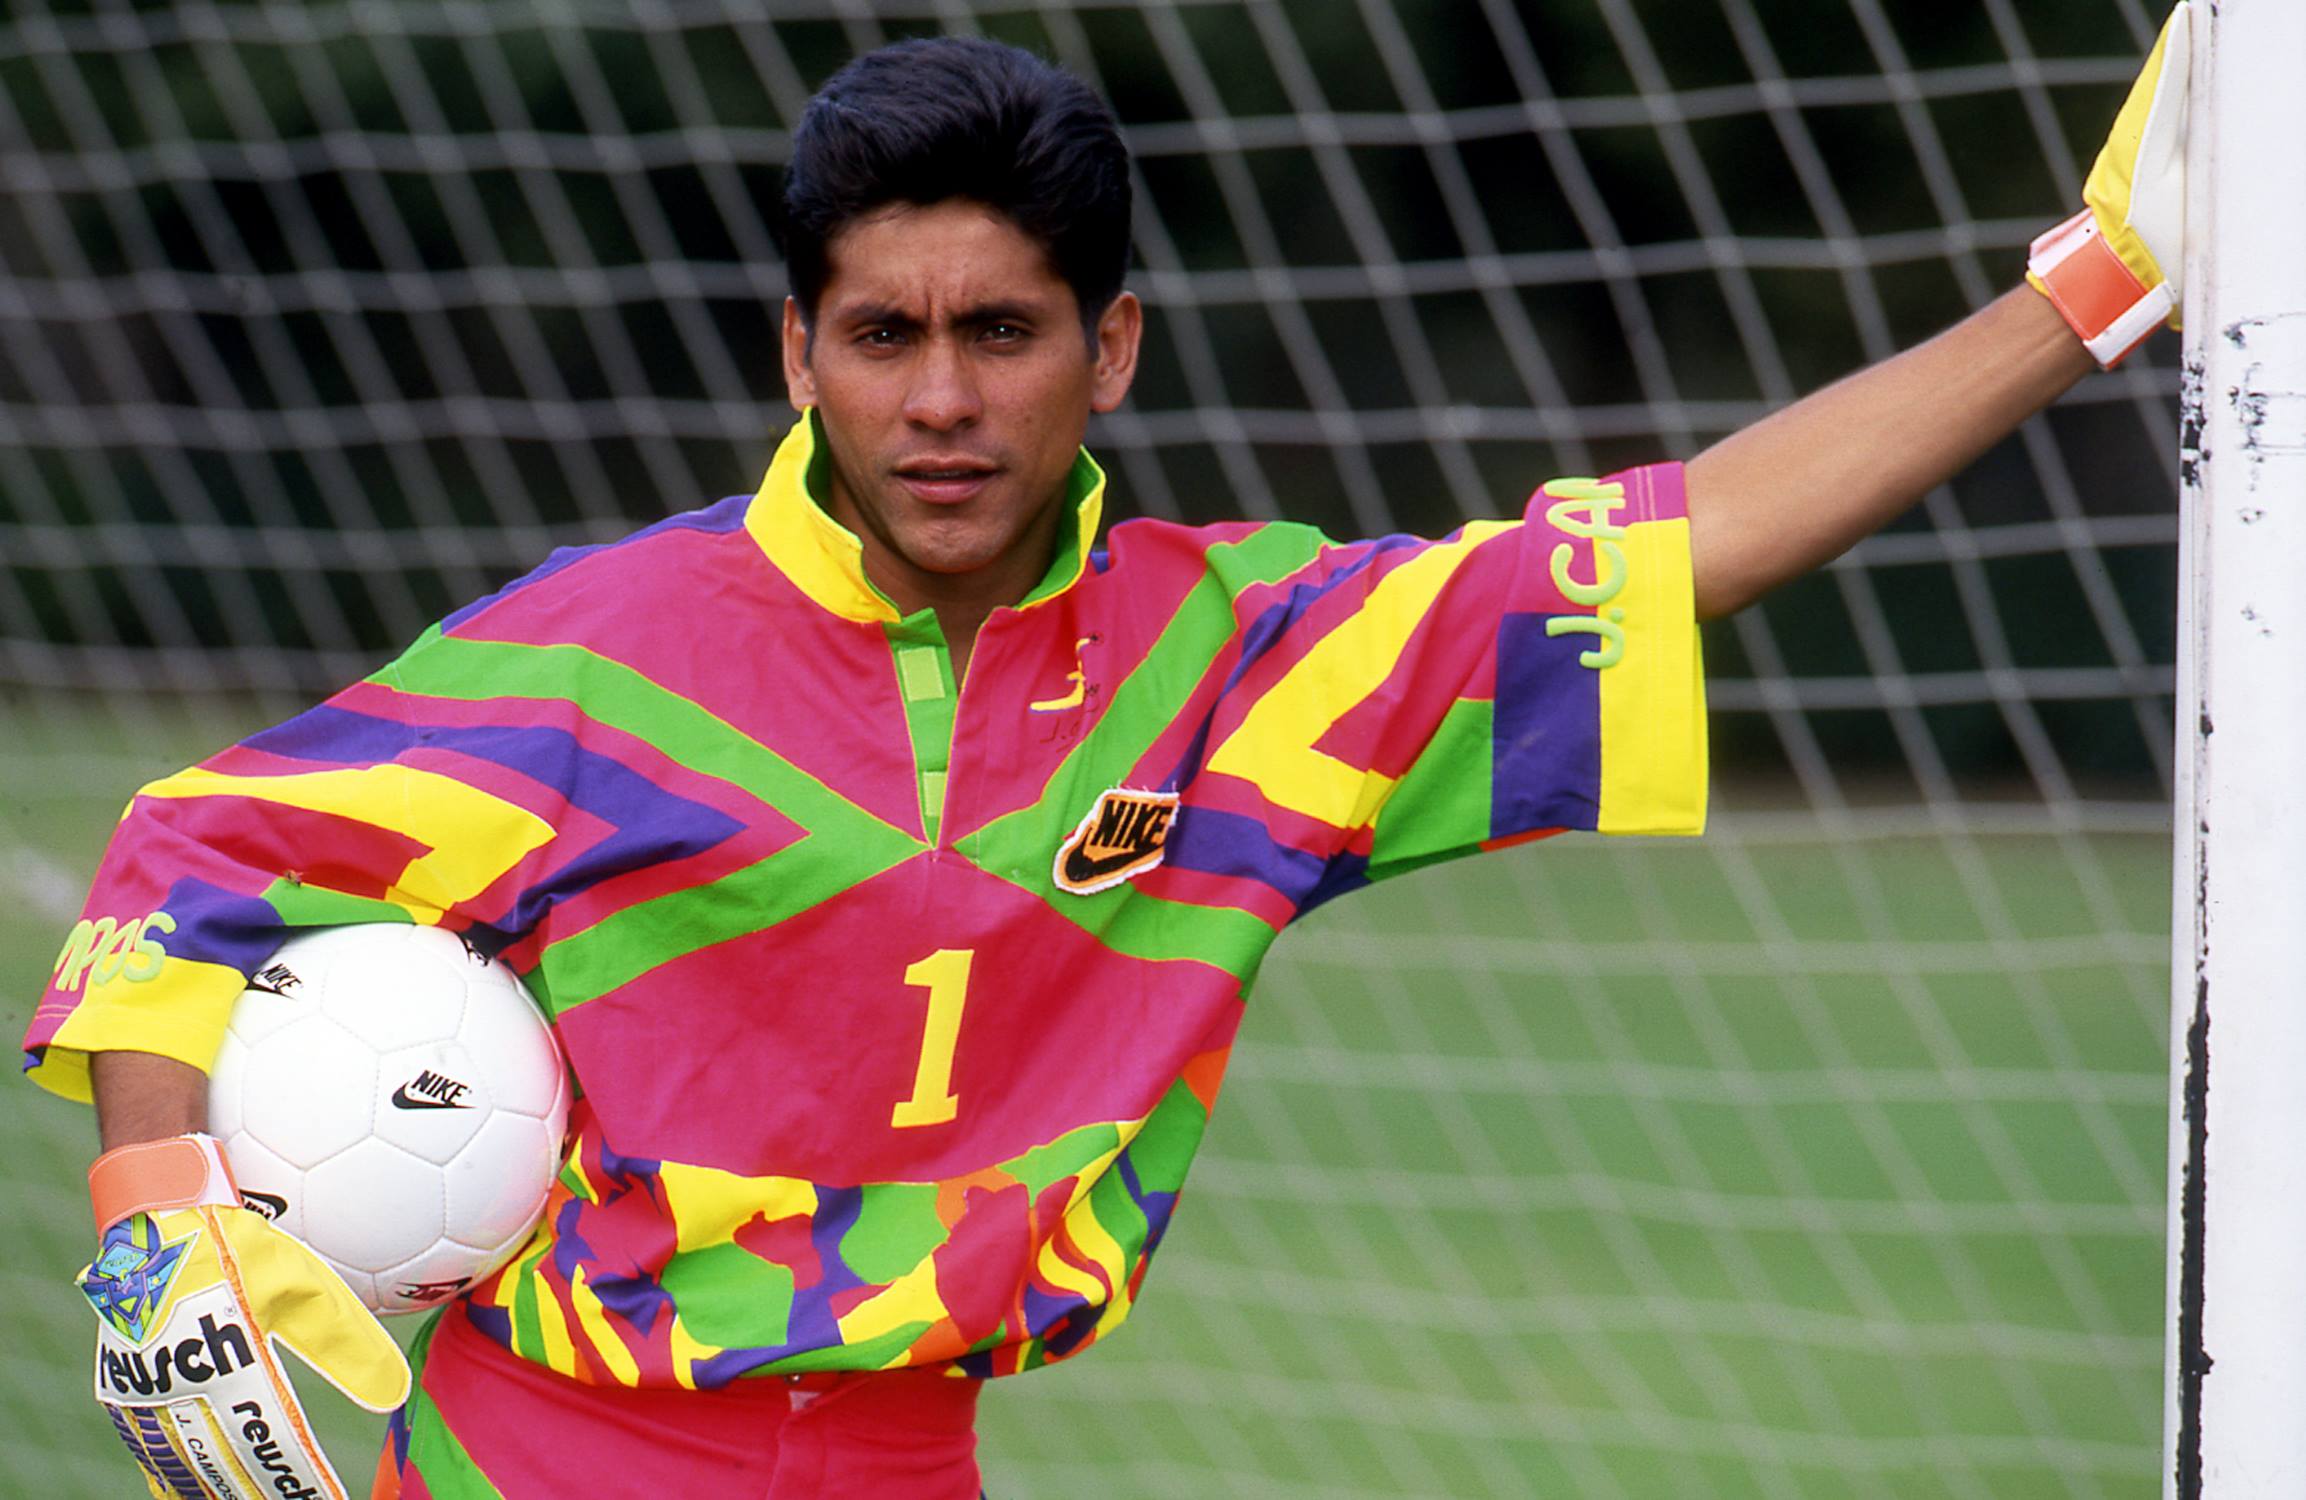 24-extraordinary-facts-about-jorge-campos